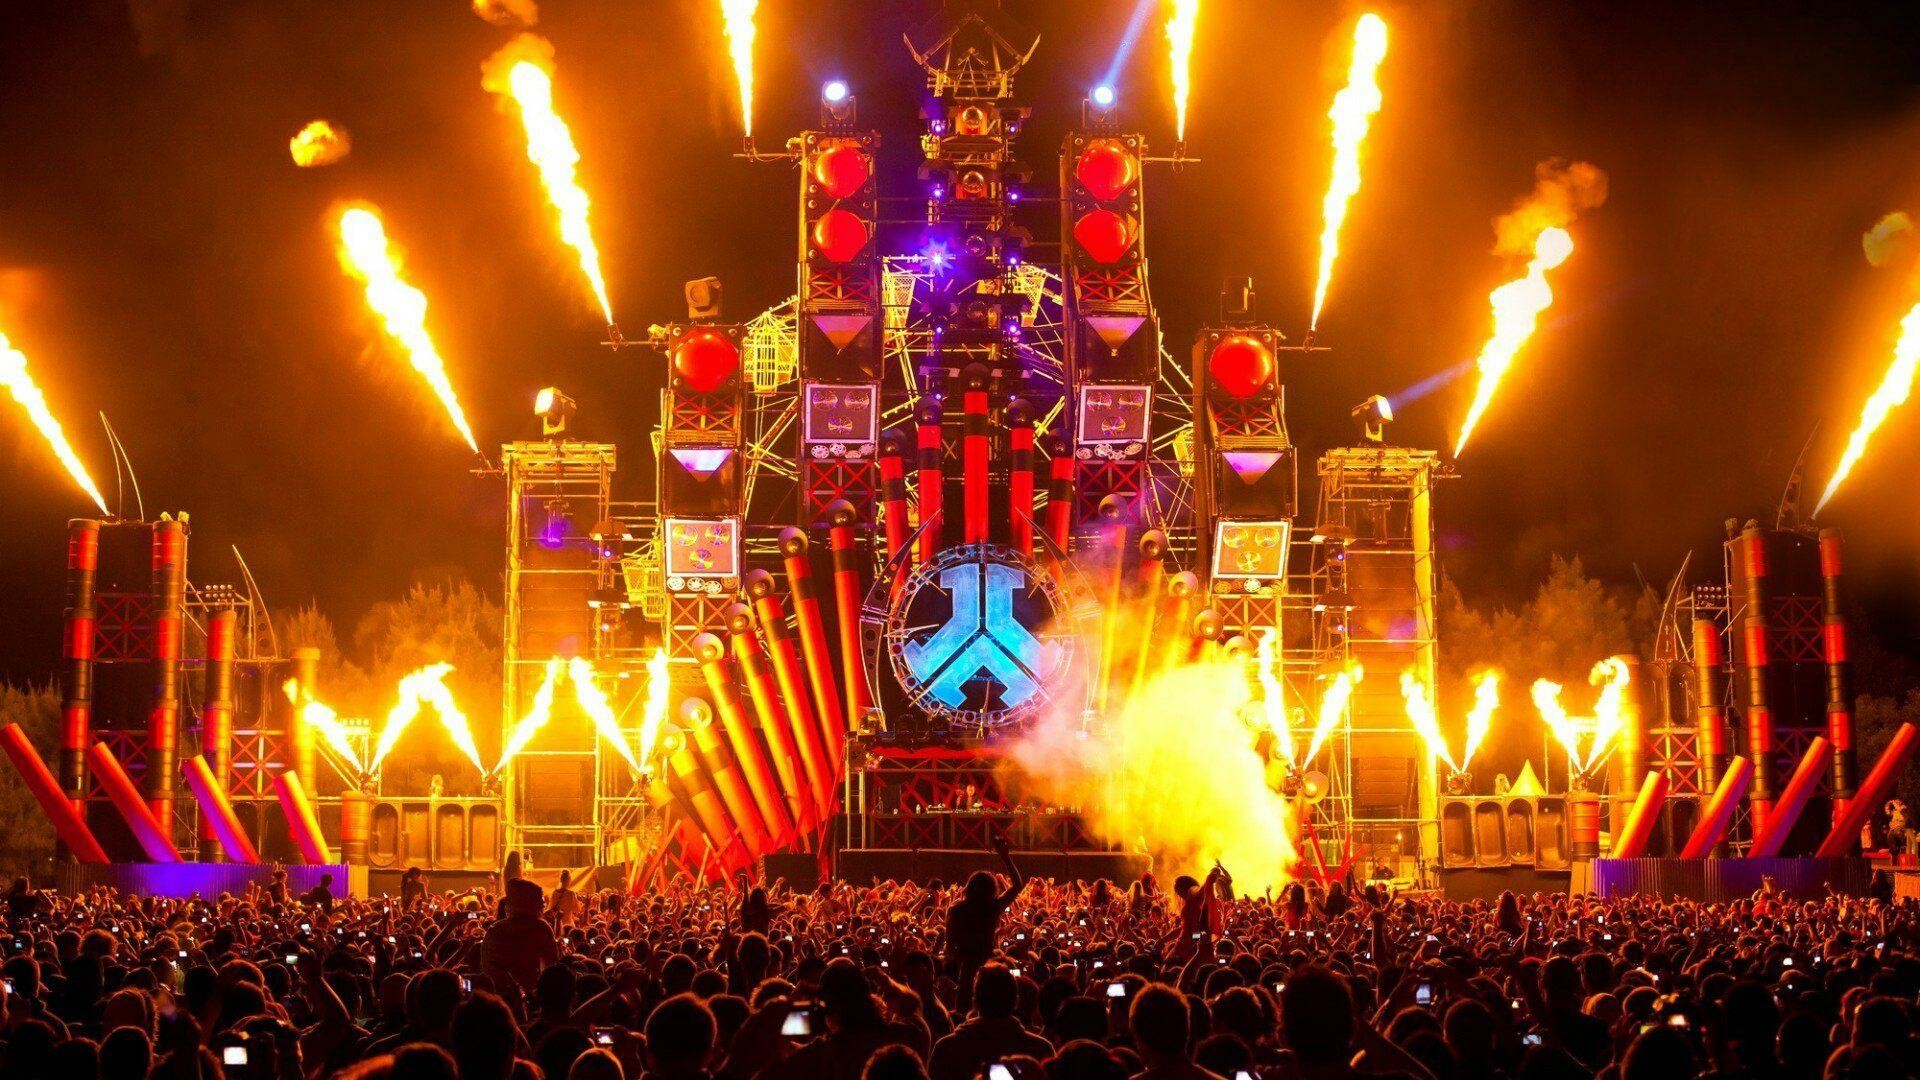 Festival: Defqon.1, One of the best outdoor festivals for Hardstyle music. 1920x1080 Full HD Wallpaper.